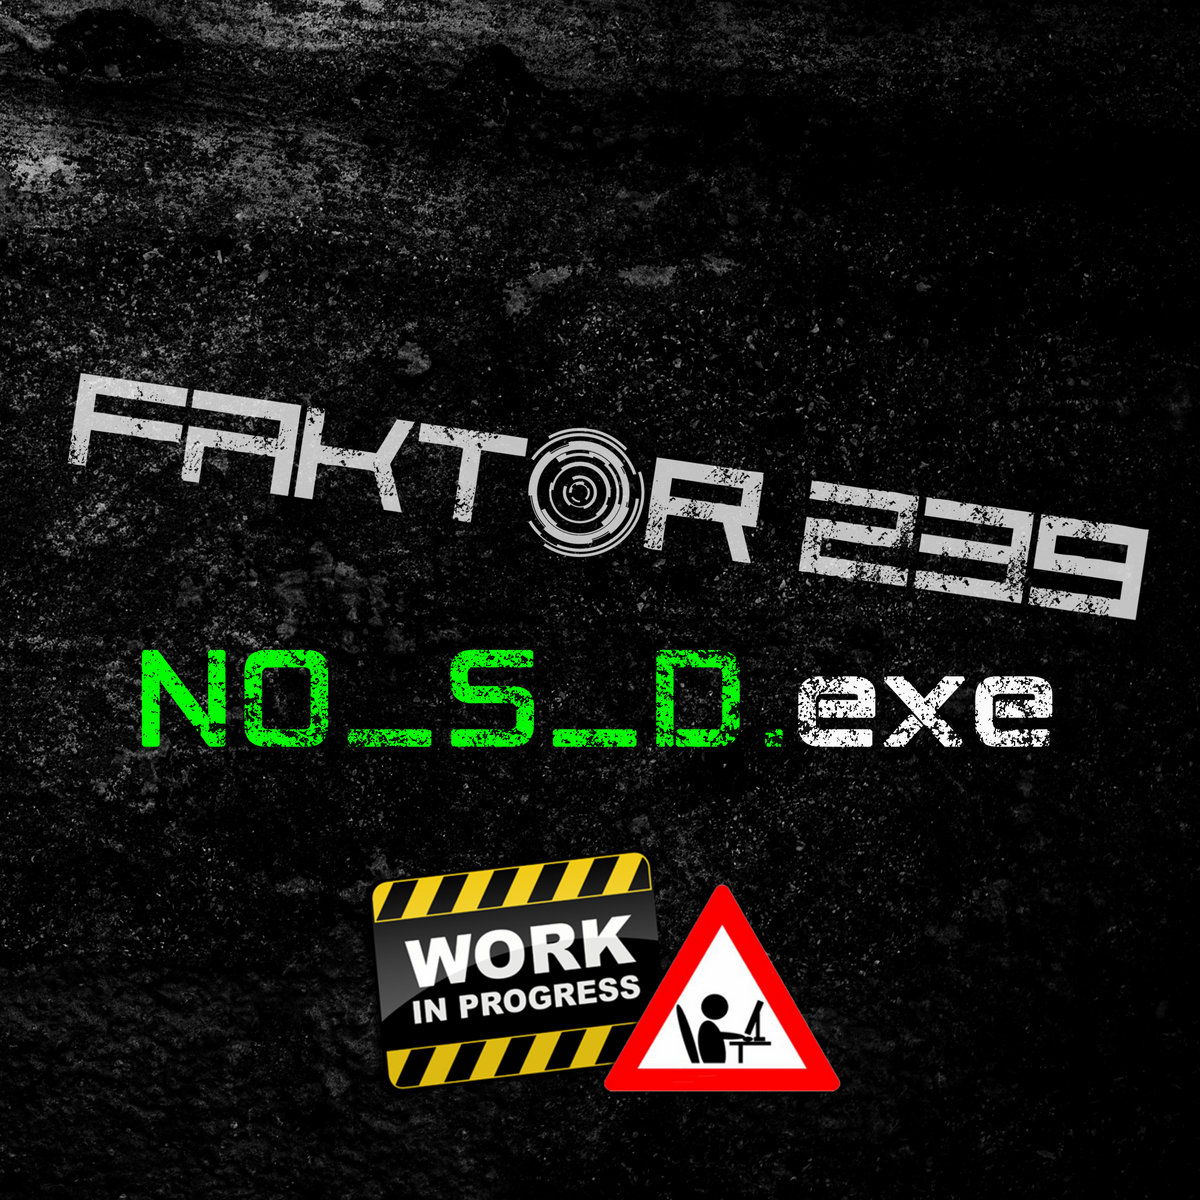 Faktor 239 - Realization: Breed the sin - Faktor 239 -  NO_S_D?.?exe